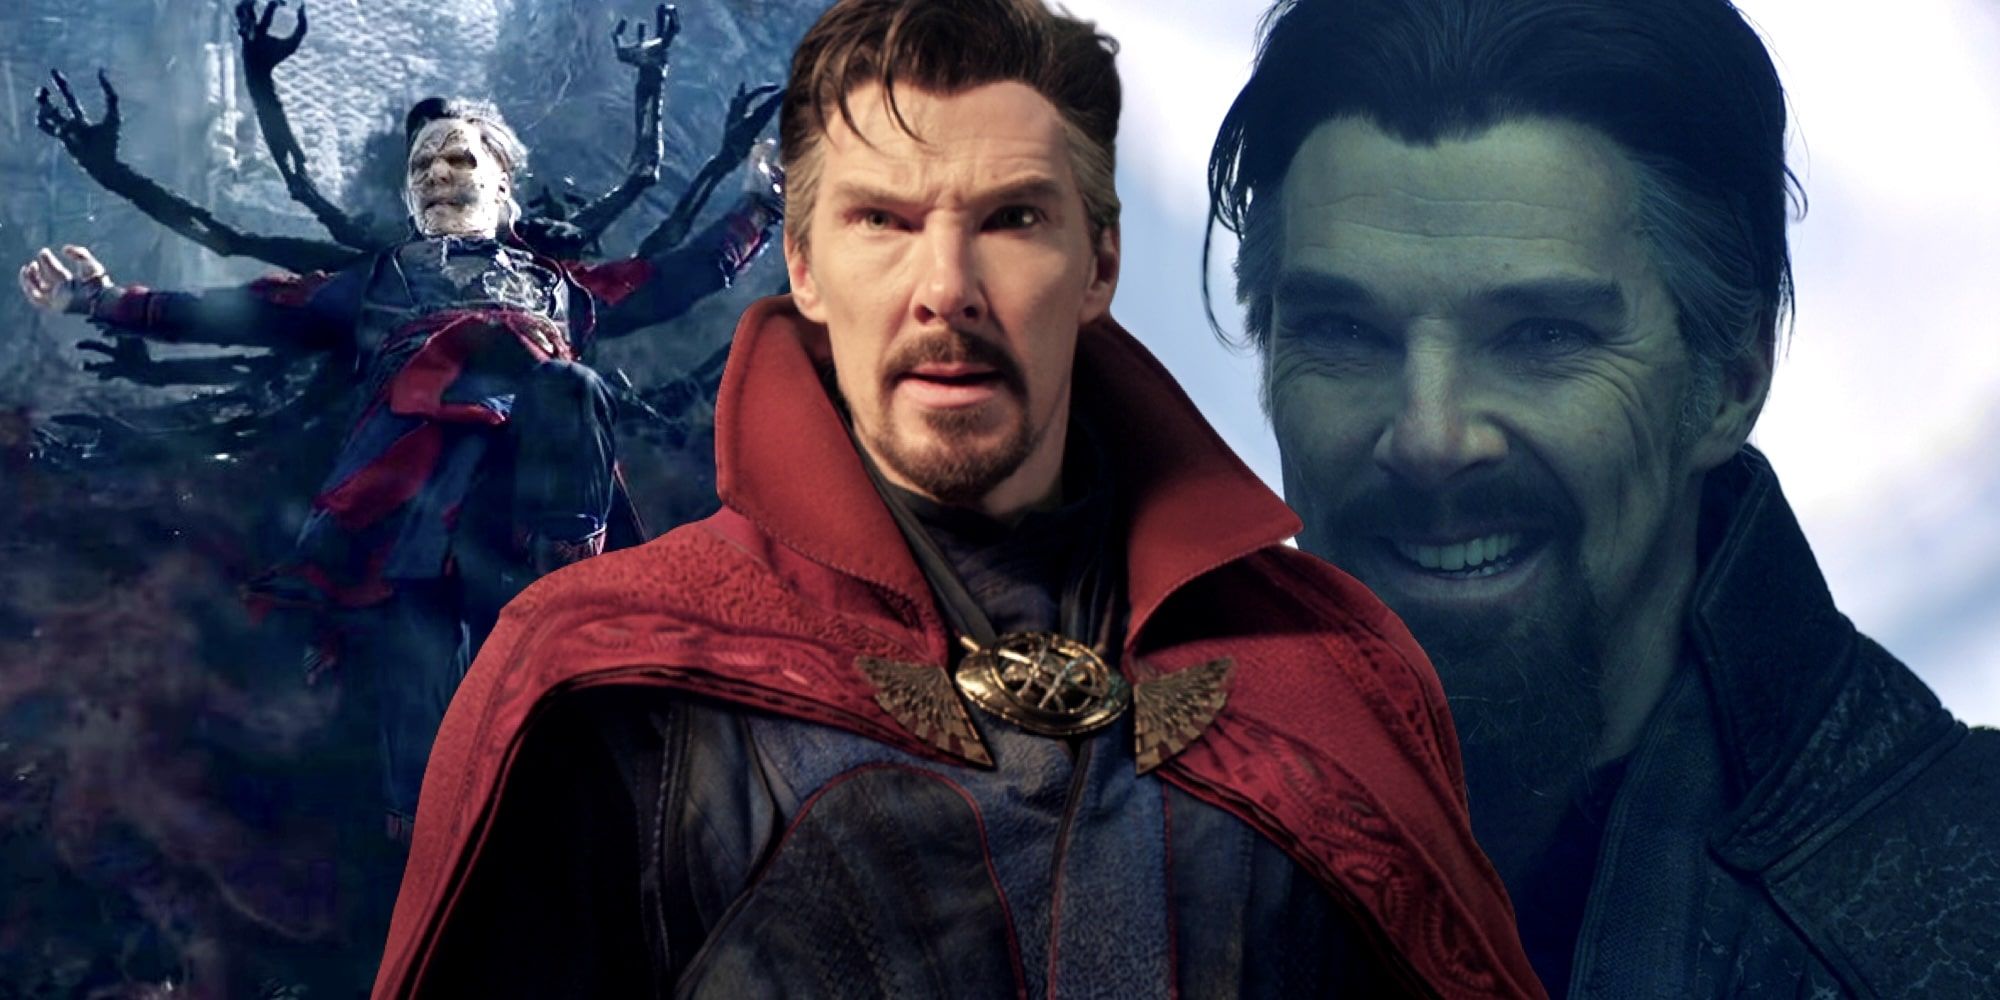 Doctor Strange variants in the Multiverse of Madness